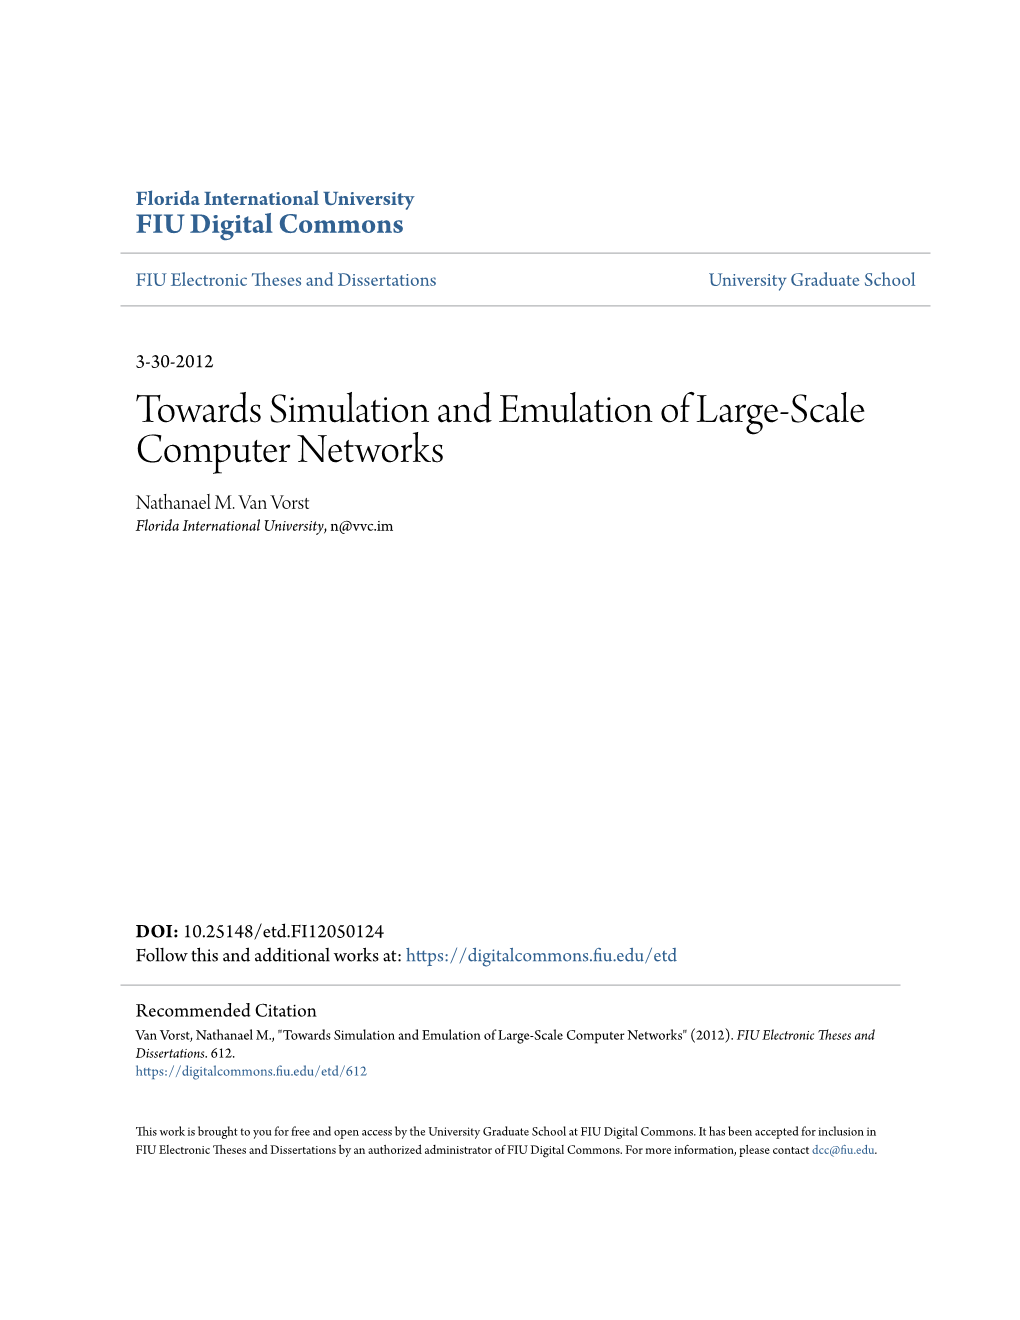 Towards Simulation and Emulation of Large-Scale Computer Networks Nathanael M